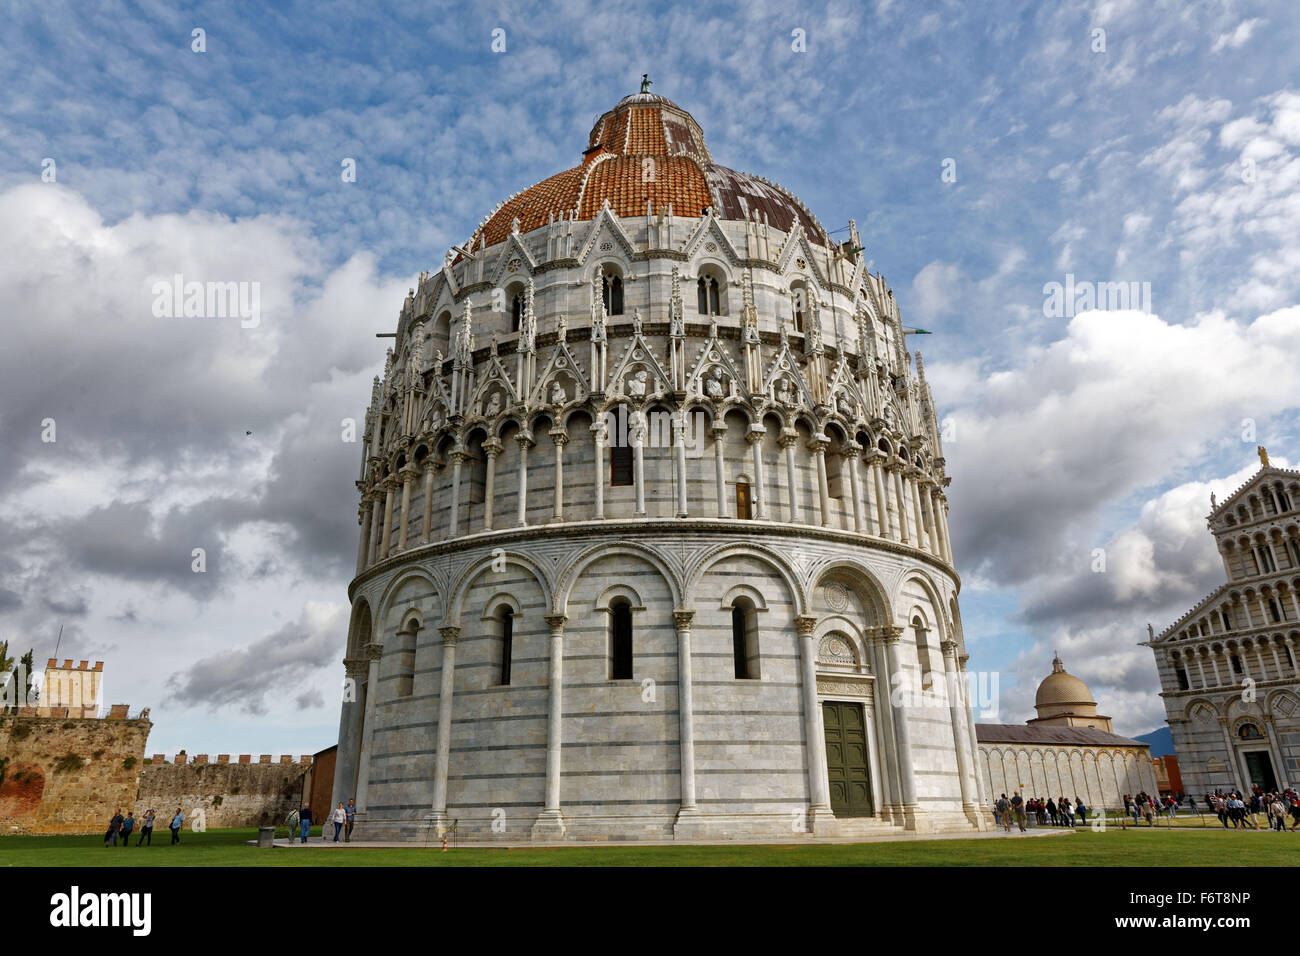 The Bapitistry in the Piazza dei Miracoli, or Fields of Miracles in the Italian city of Pisa. Stock Photo